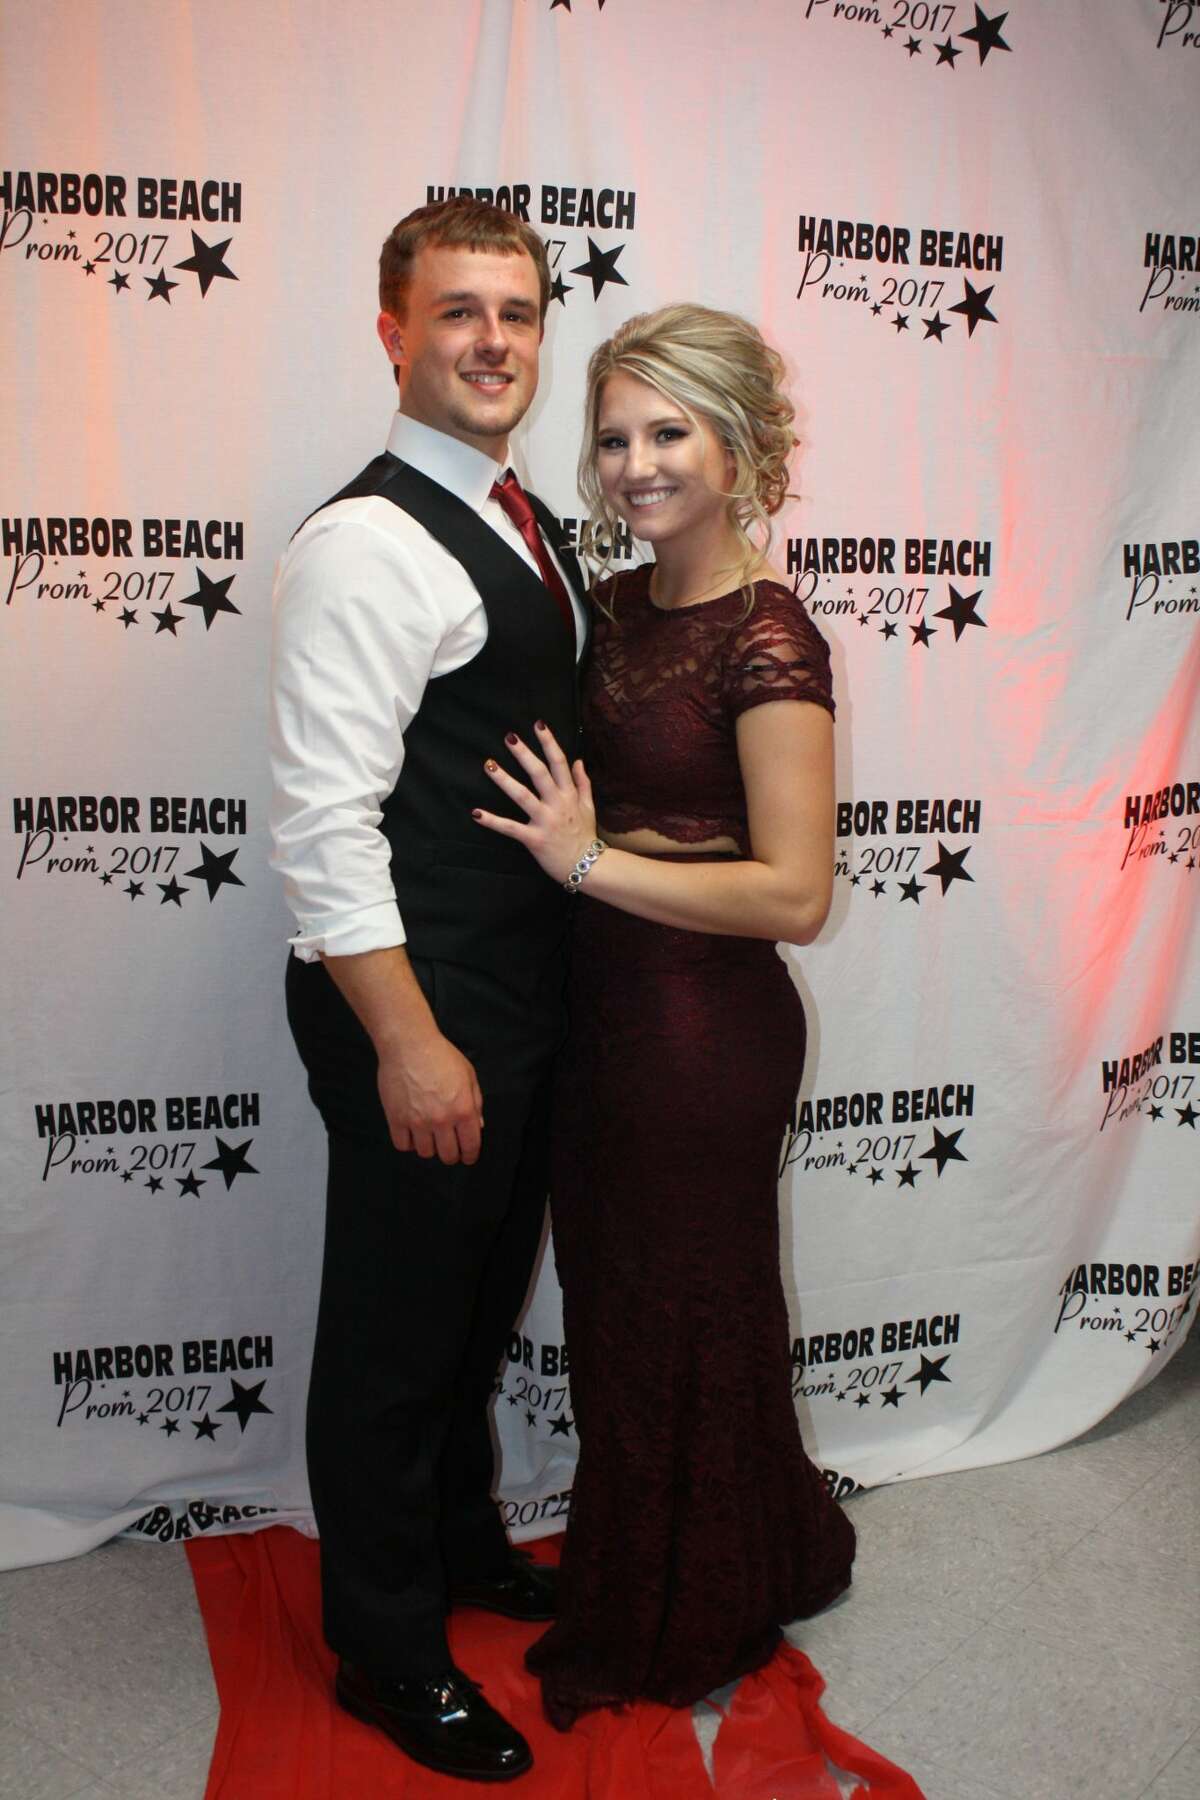 The 2017 Harbor Beach Prom was held Saturday at the Ubly Foxhunters Club.